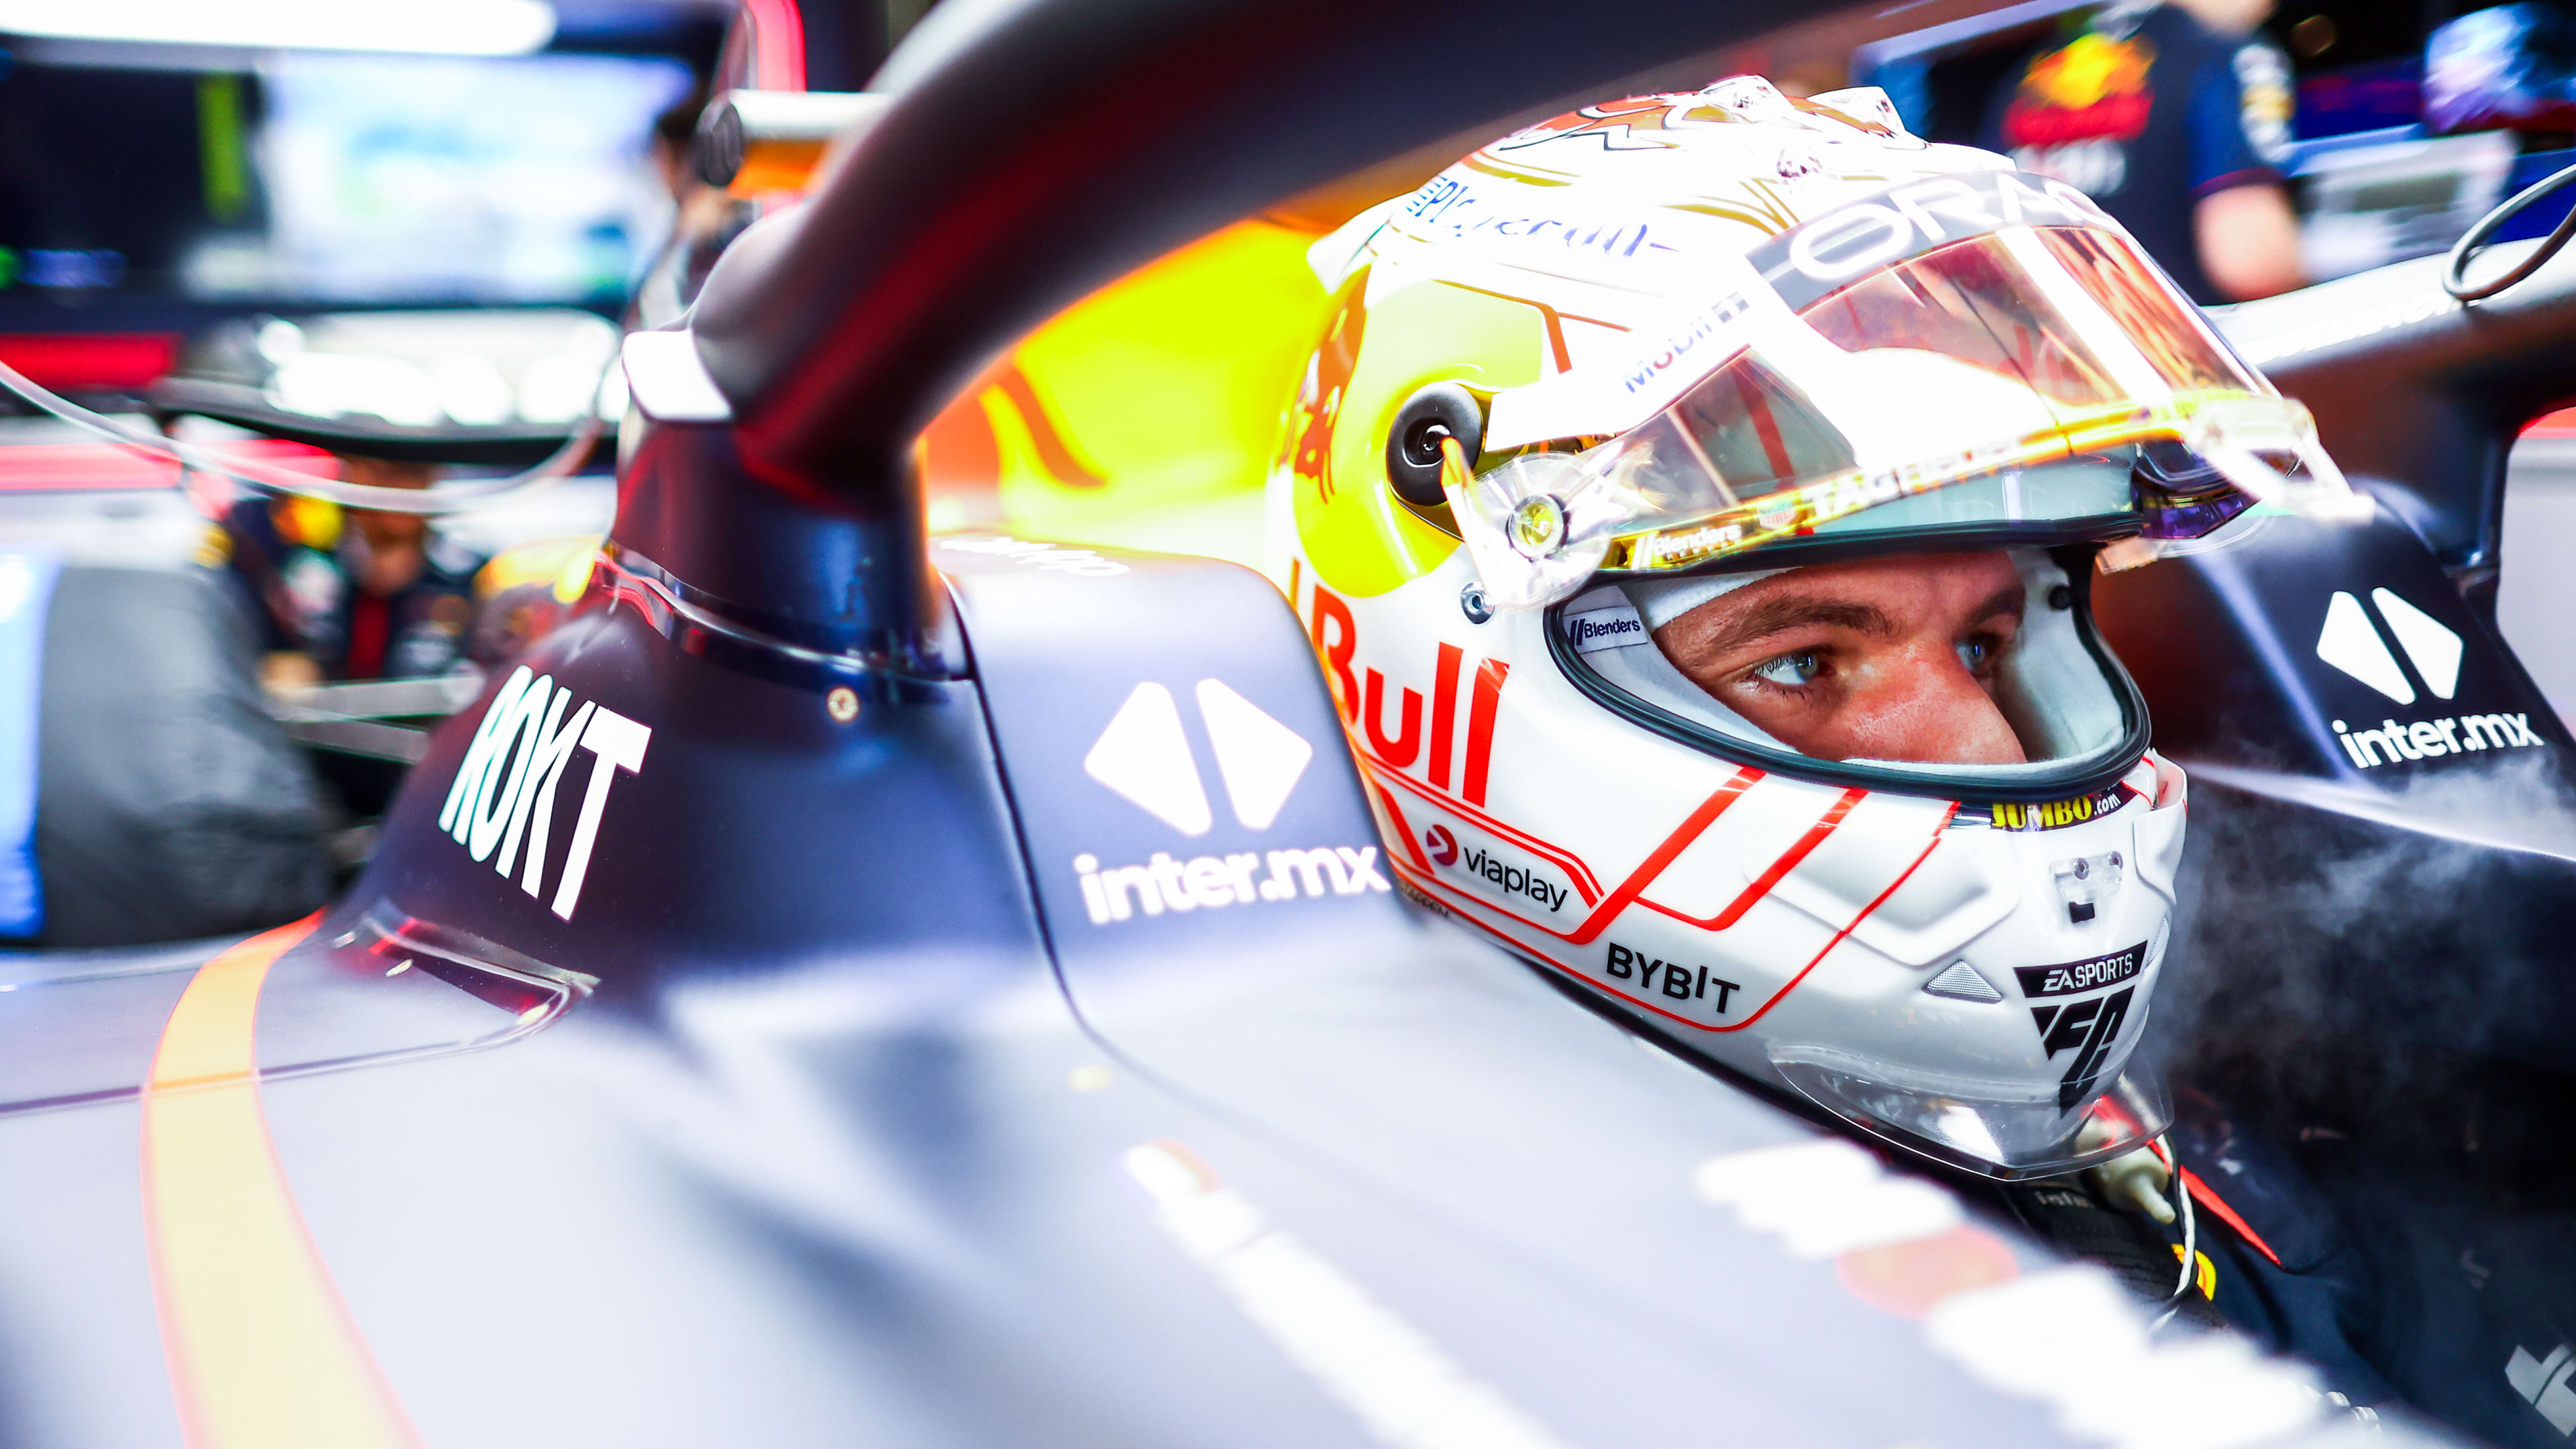 FP1 Verstappen comfortably heads Sainz and Norris in opening practice session in Japan Formula 1®